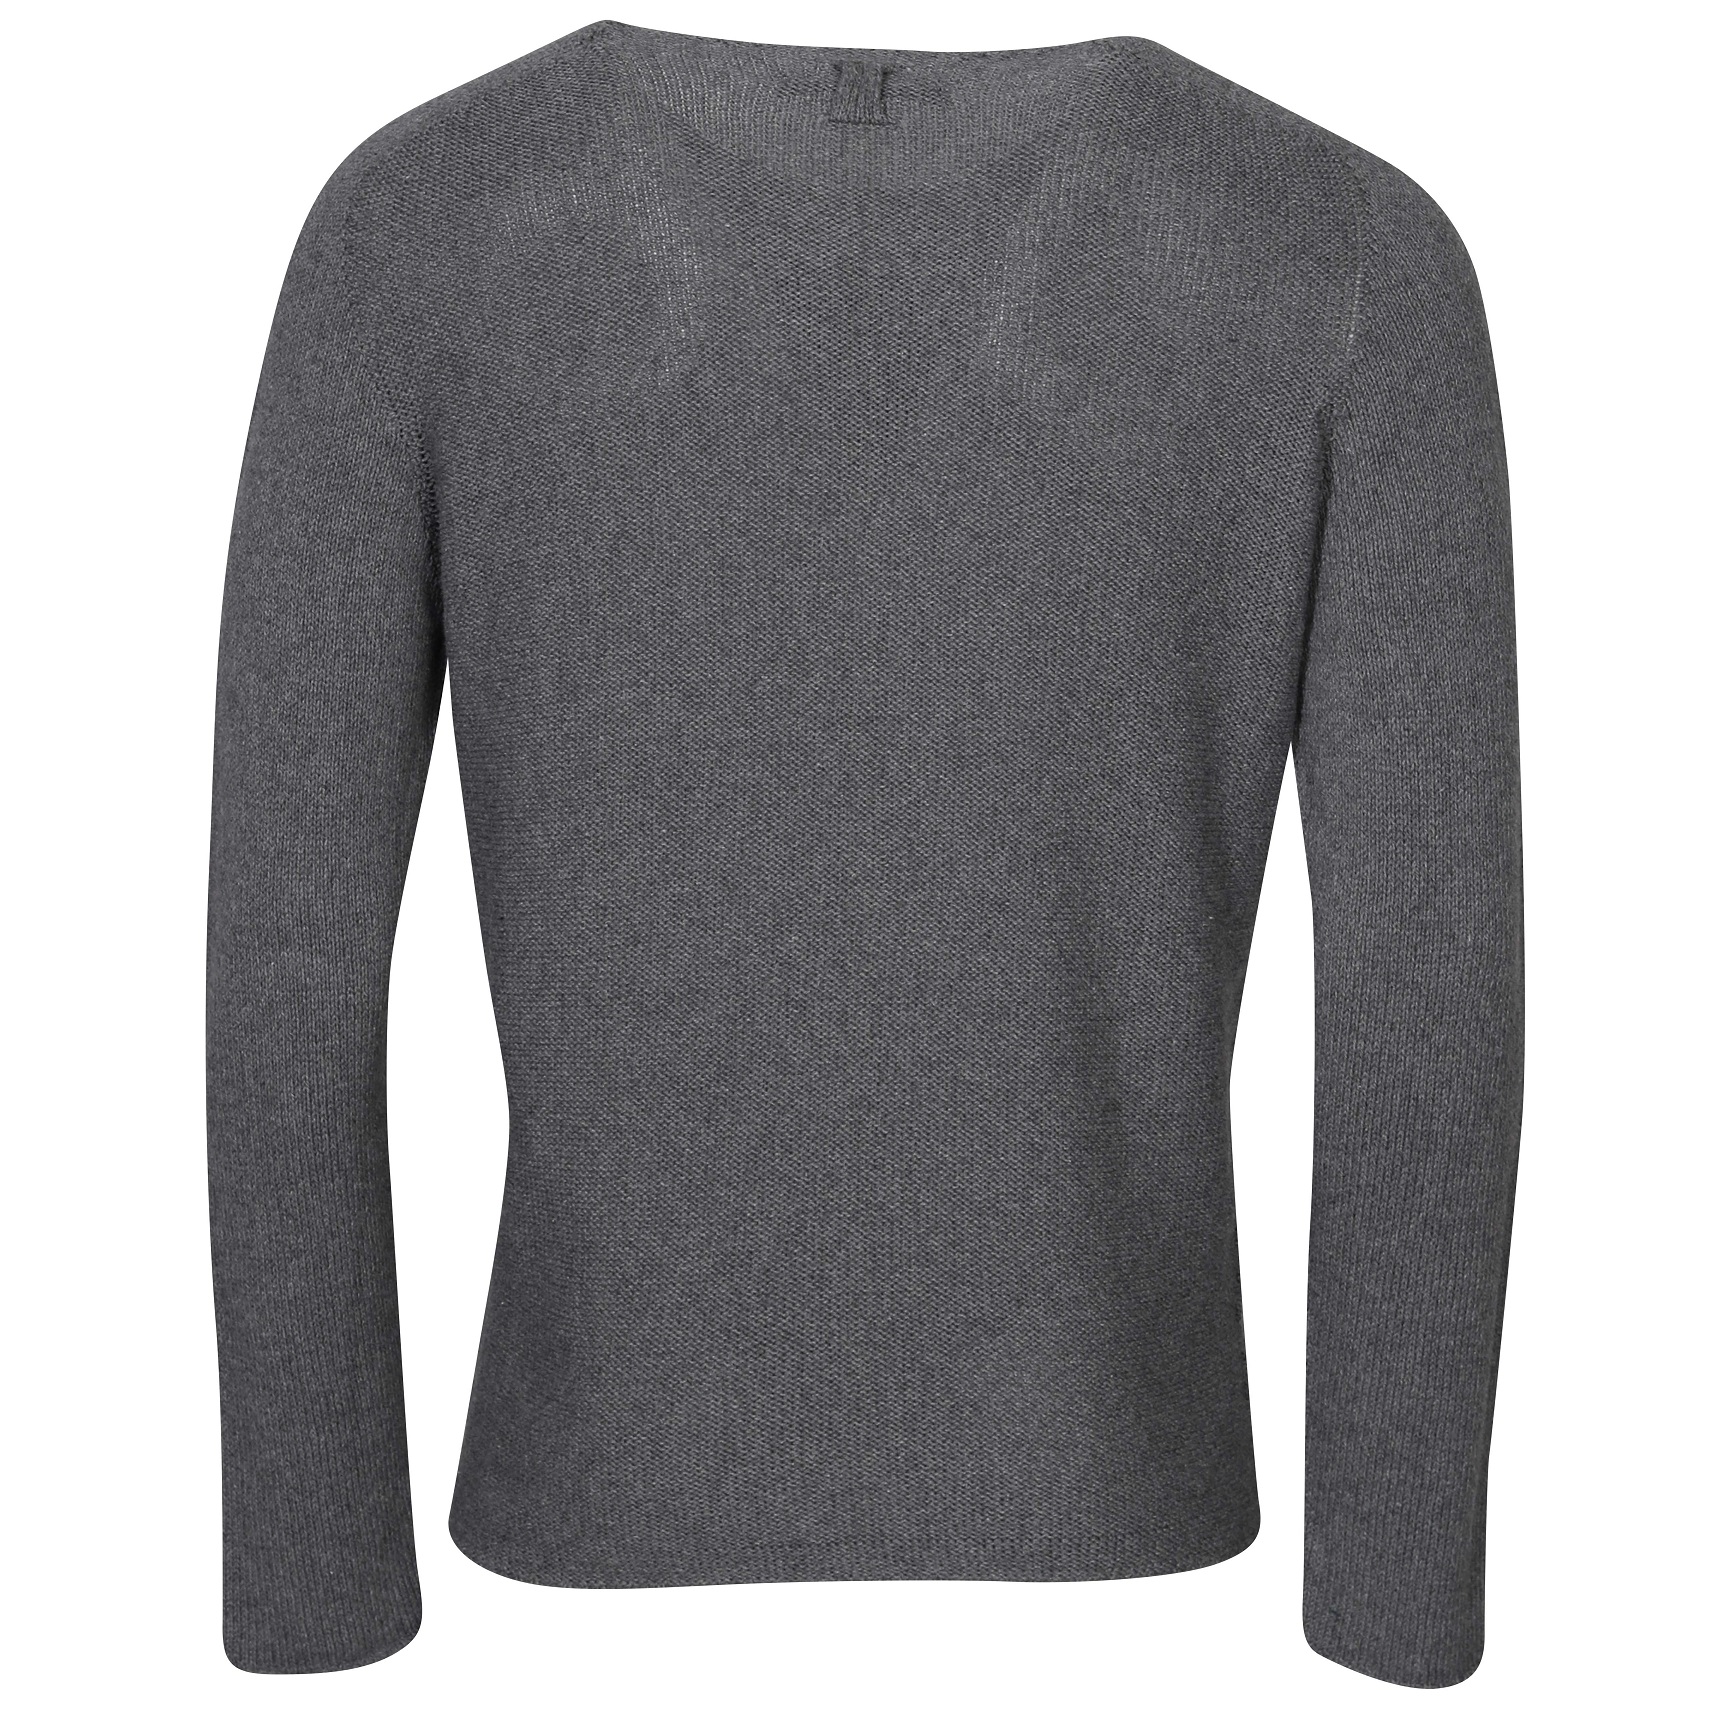 HANNES ROETHER Knit Sweater in Grey XXL